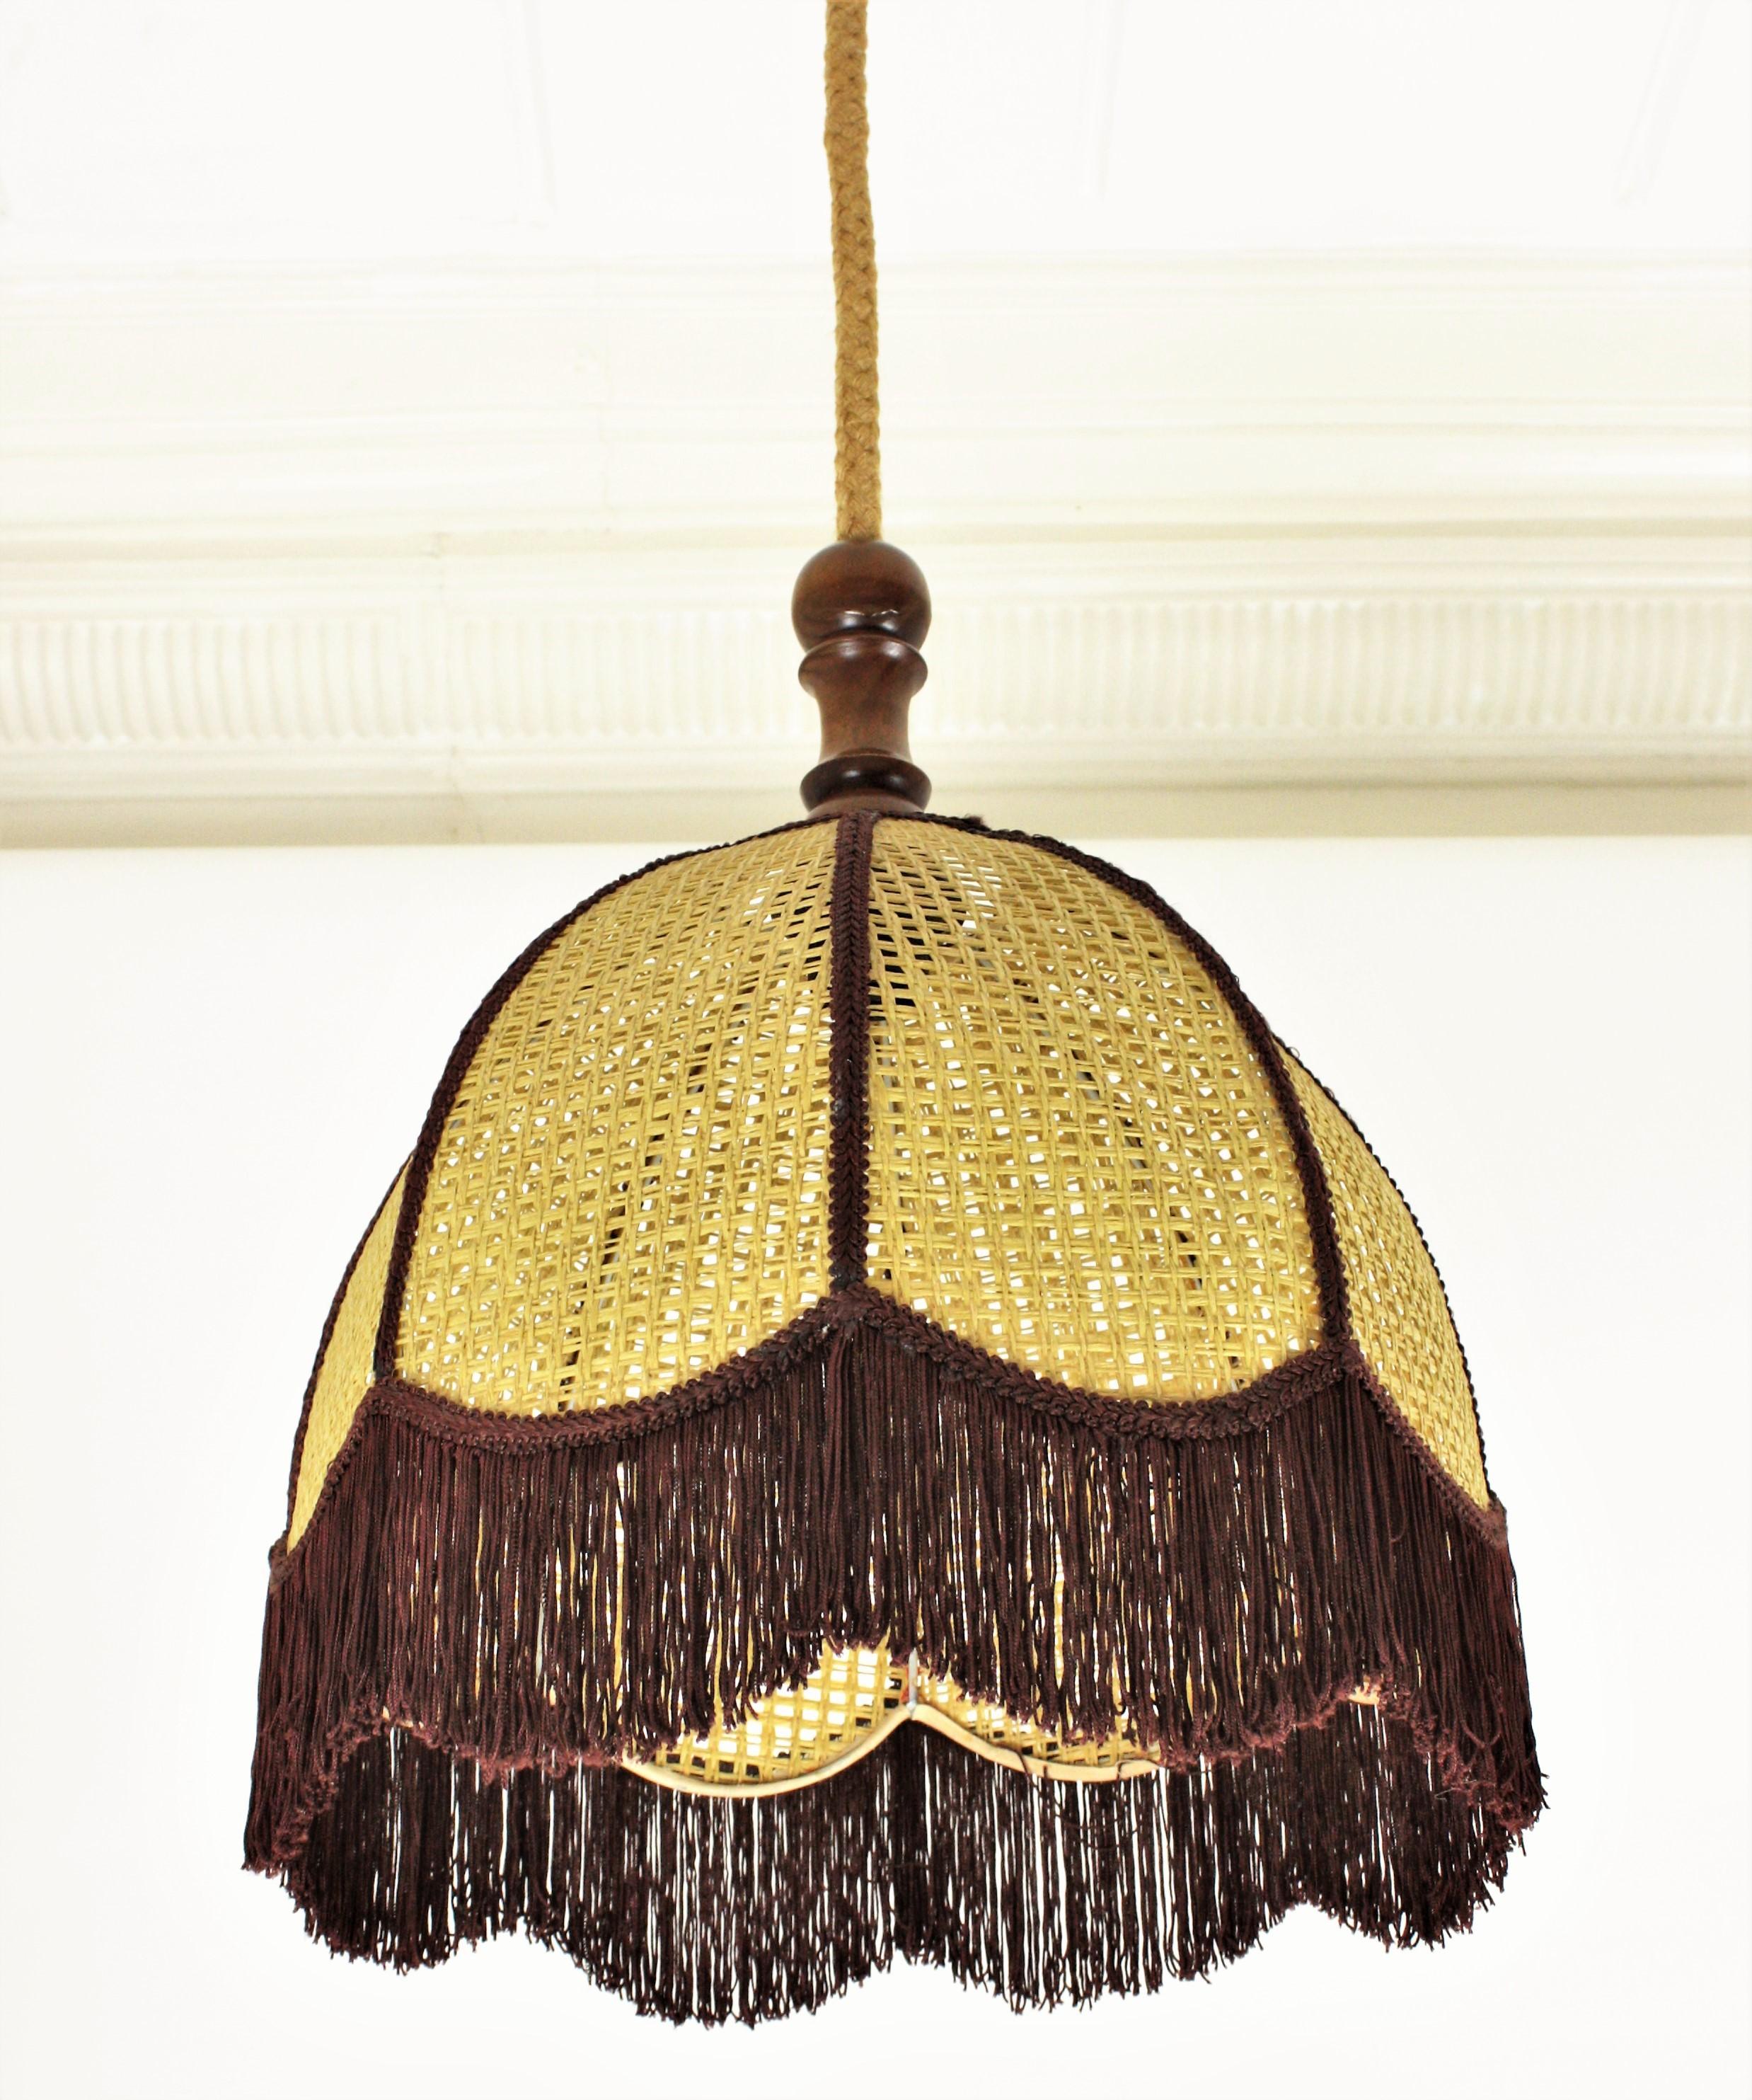 20th Century Rattan Wicker Bell Pendant Hanging Lamp with Fringe, Spain, 1970s